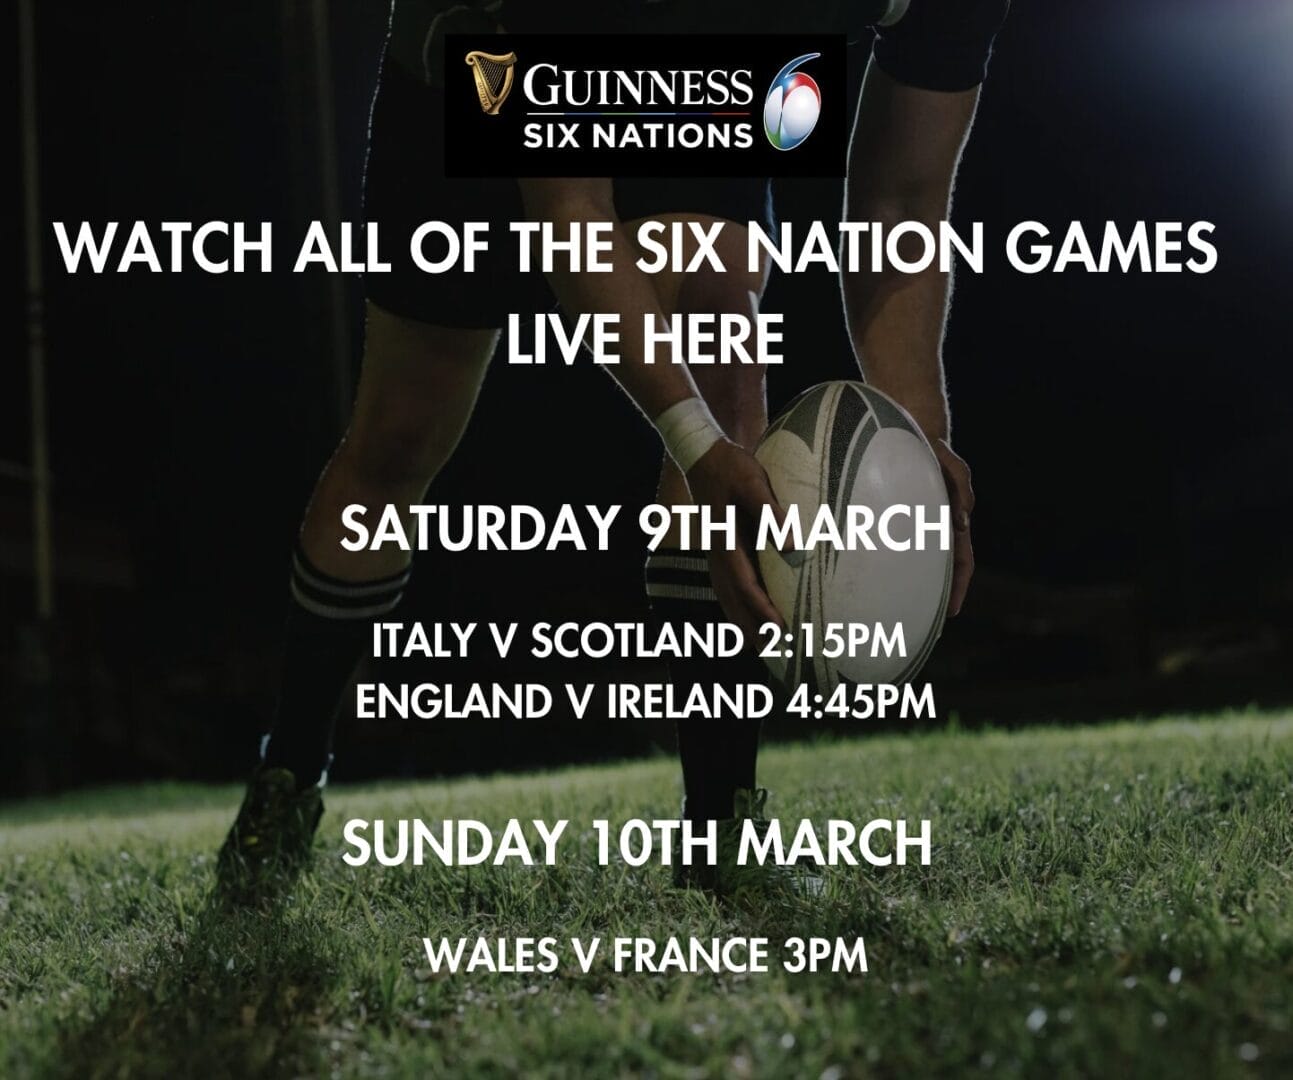 Pubs Showing The Rugby In Waterlooville - Watch All The Action At The Falcon !